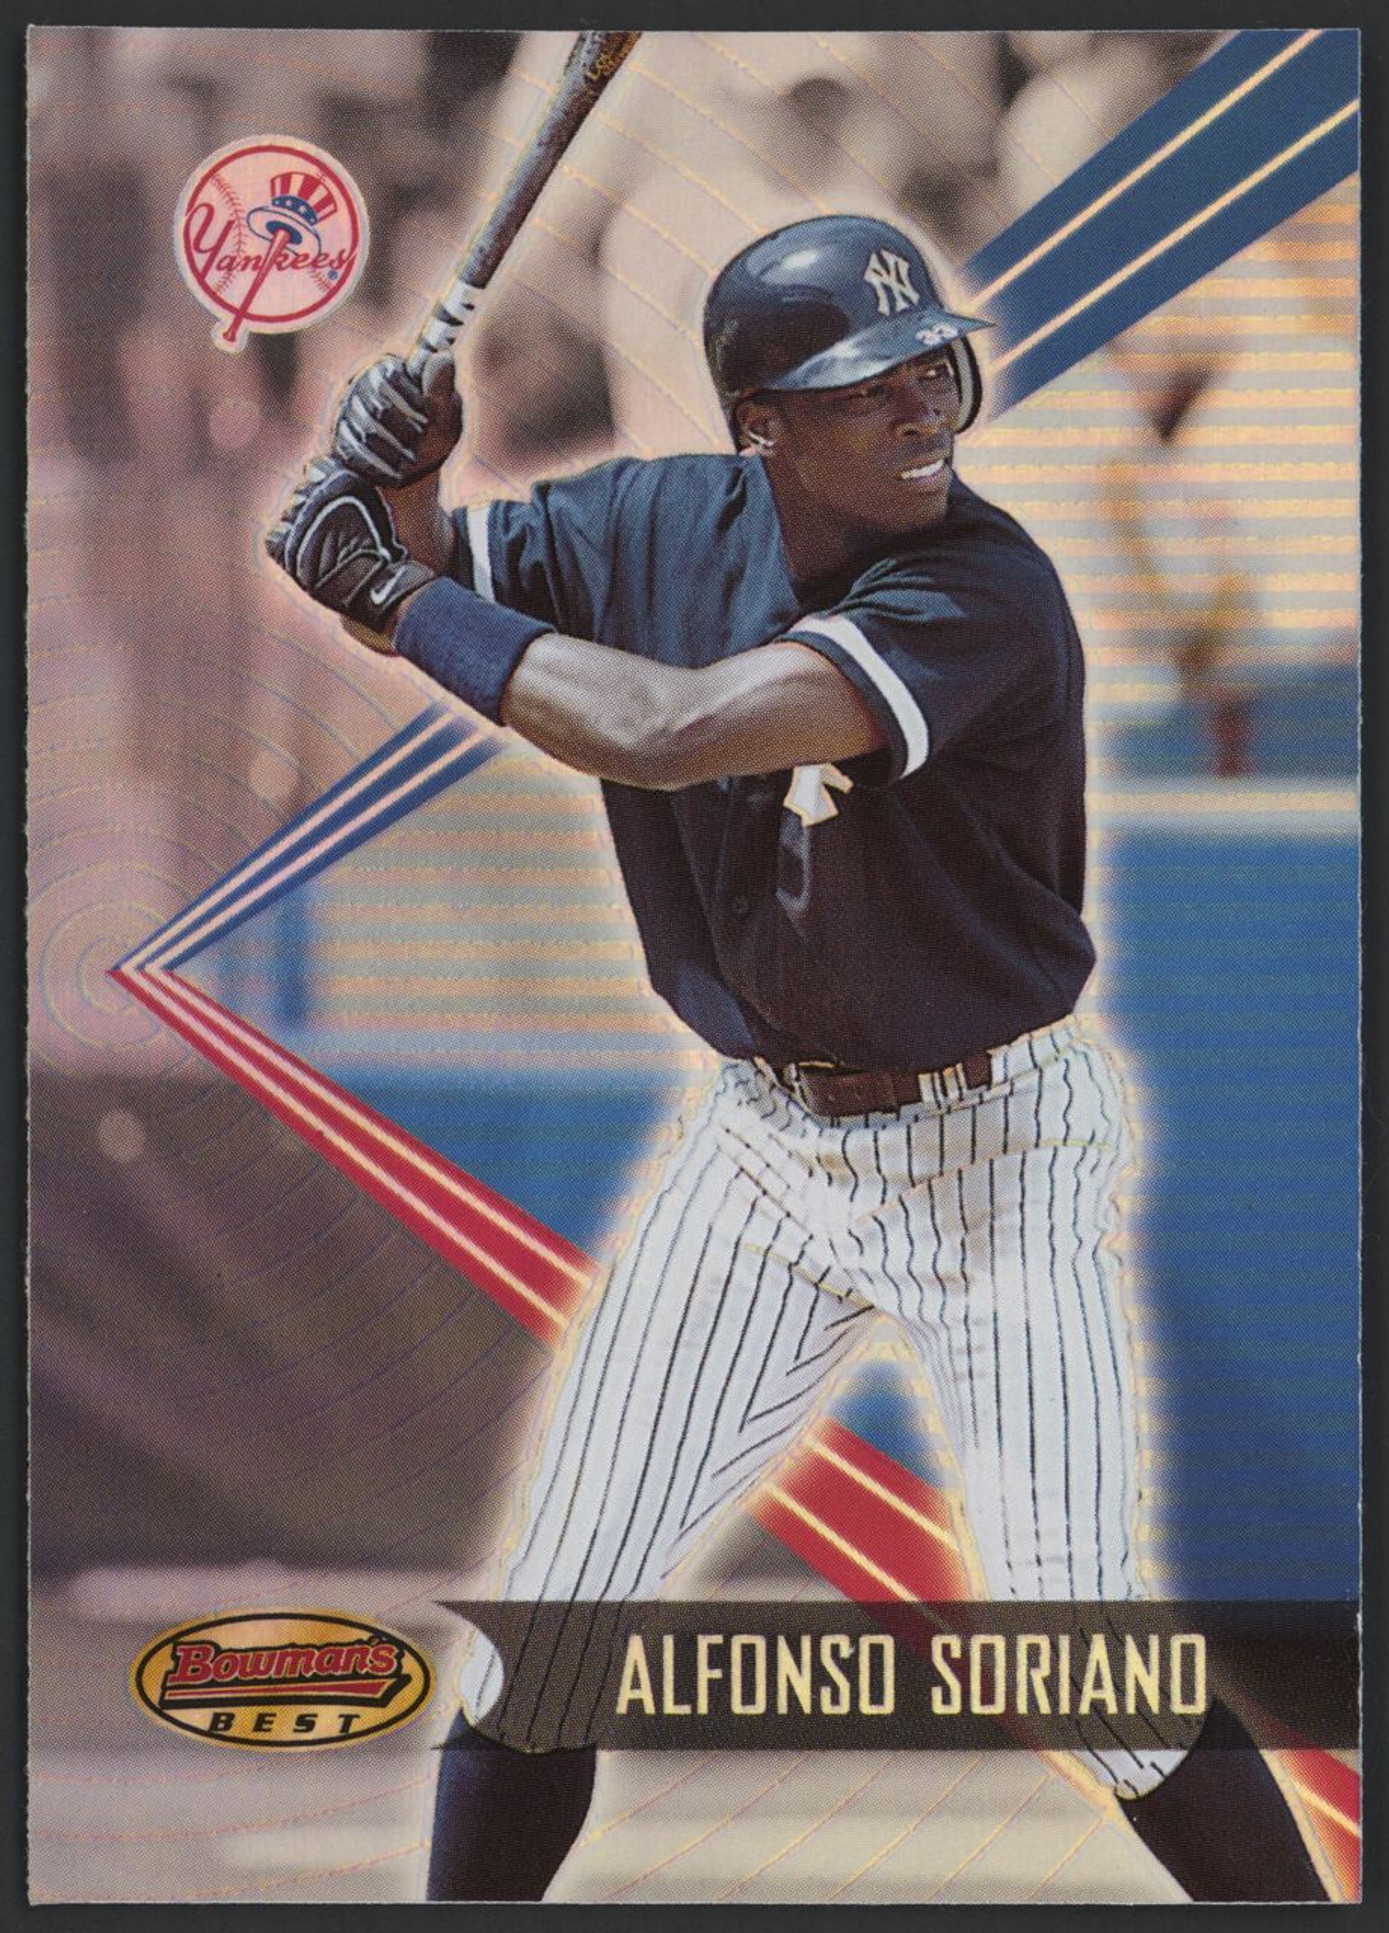 2001 Bowman's Best #124 Alfonso Soriano Holo Yankees EX